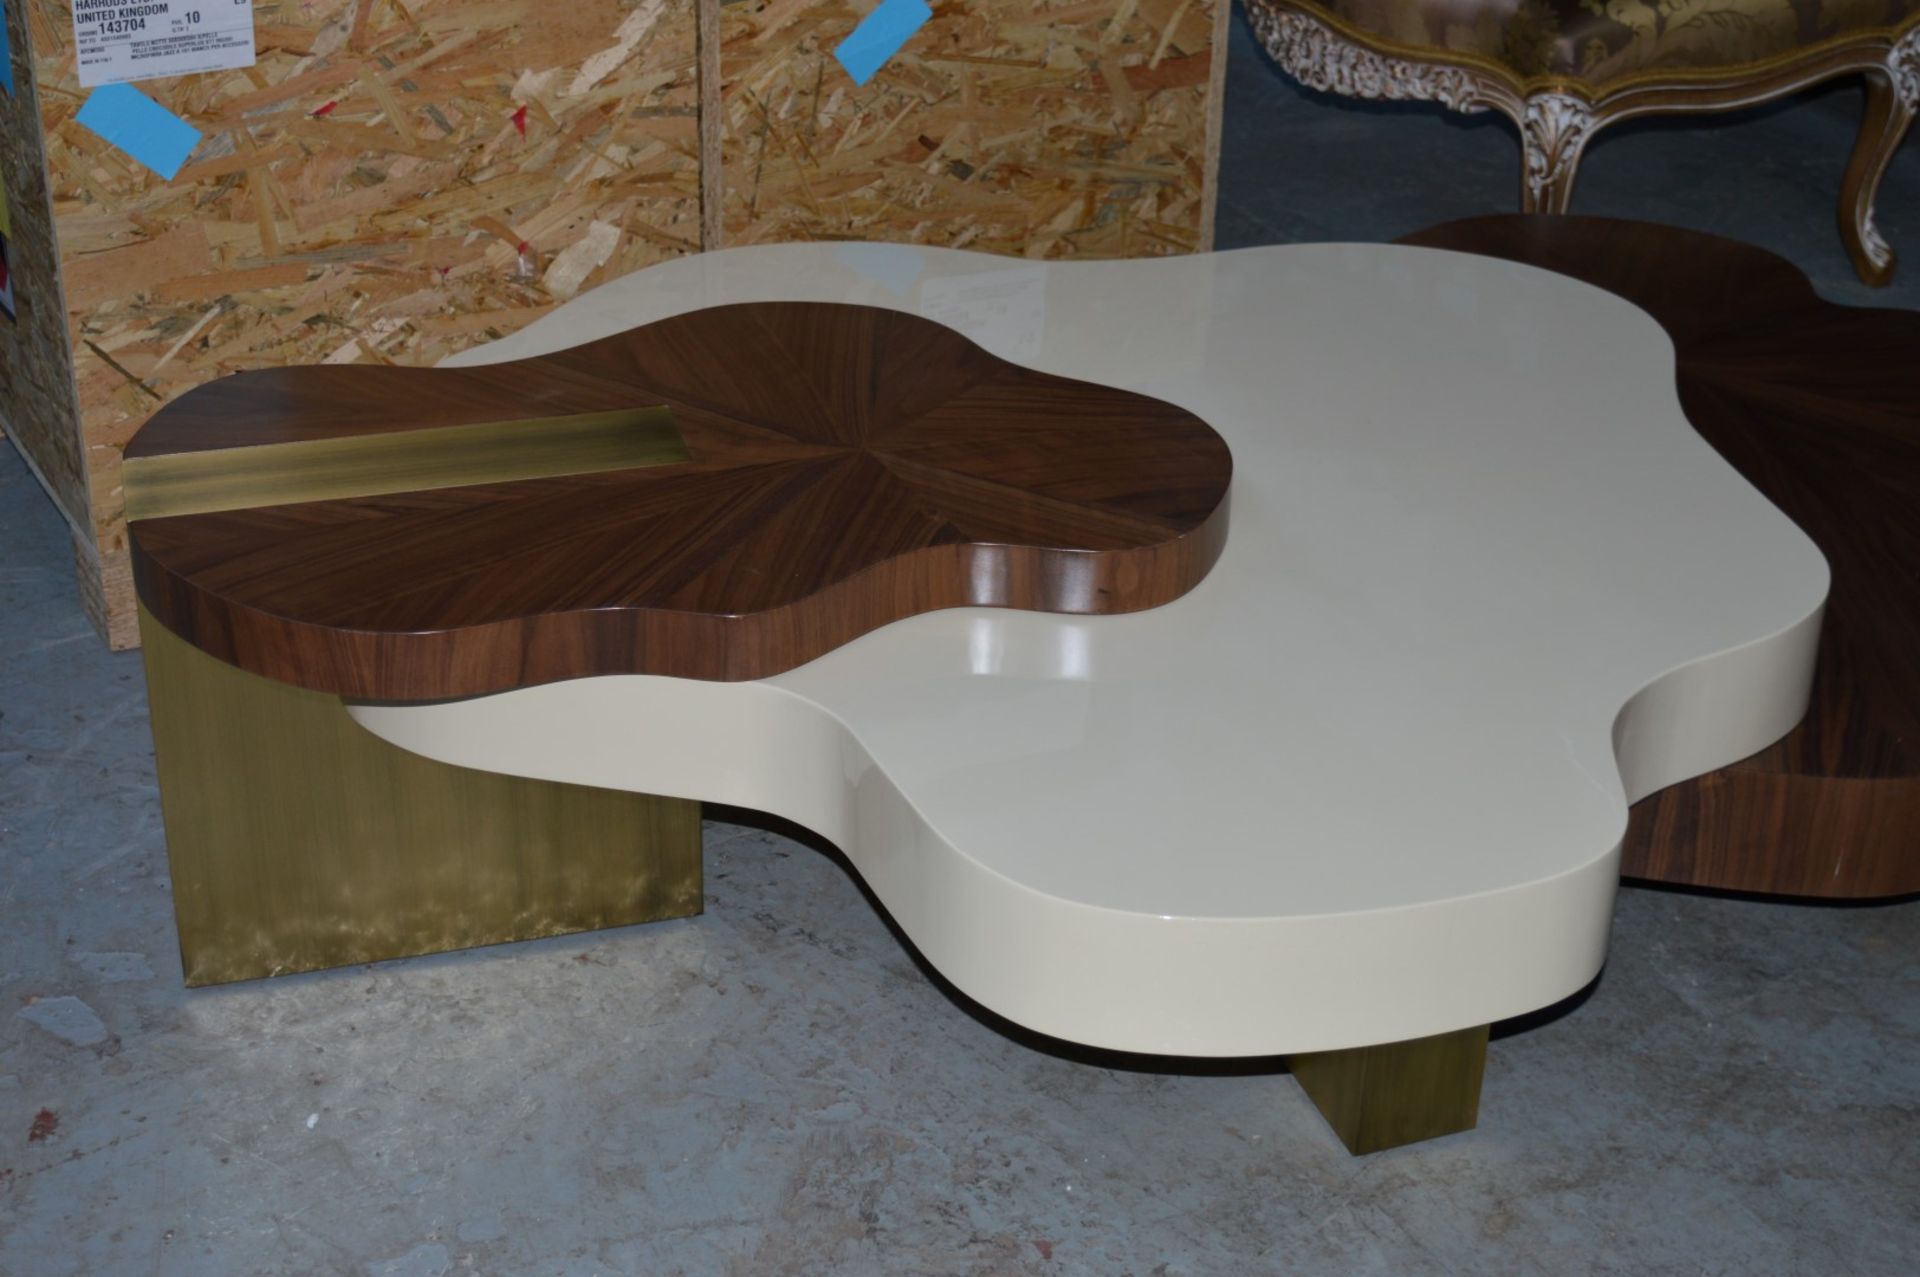 1 x Ginger & Jagger Nenhuphar Coffee Table - Urbanmint Design - Eye Catching Design - Walnut and - Image 6 of 15